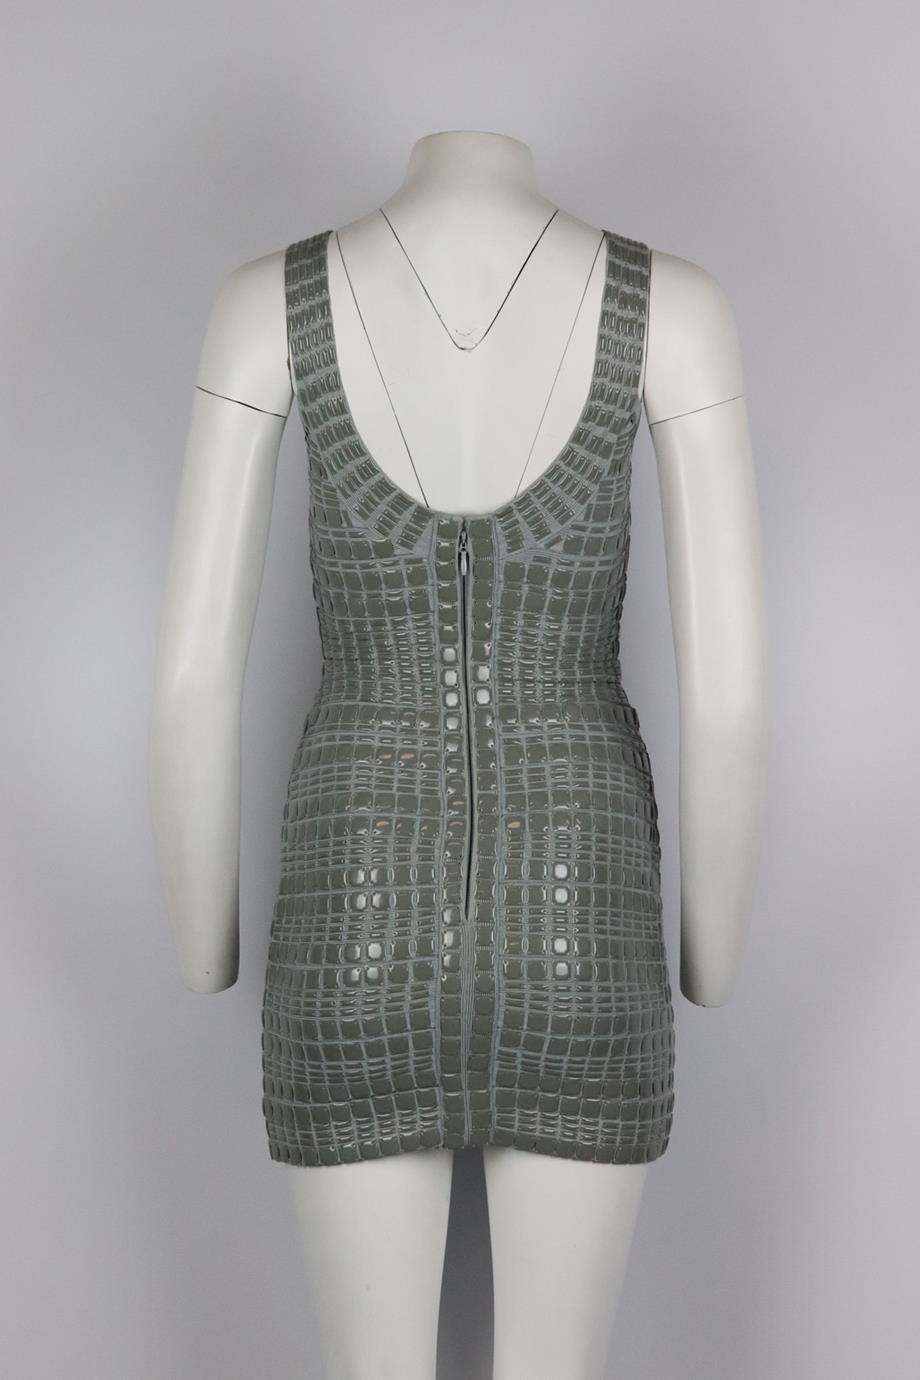 Herve Leger Embellished Bandage Mini Dress Xsmall In Excellent Condition In London, GB